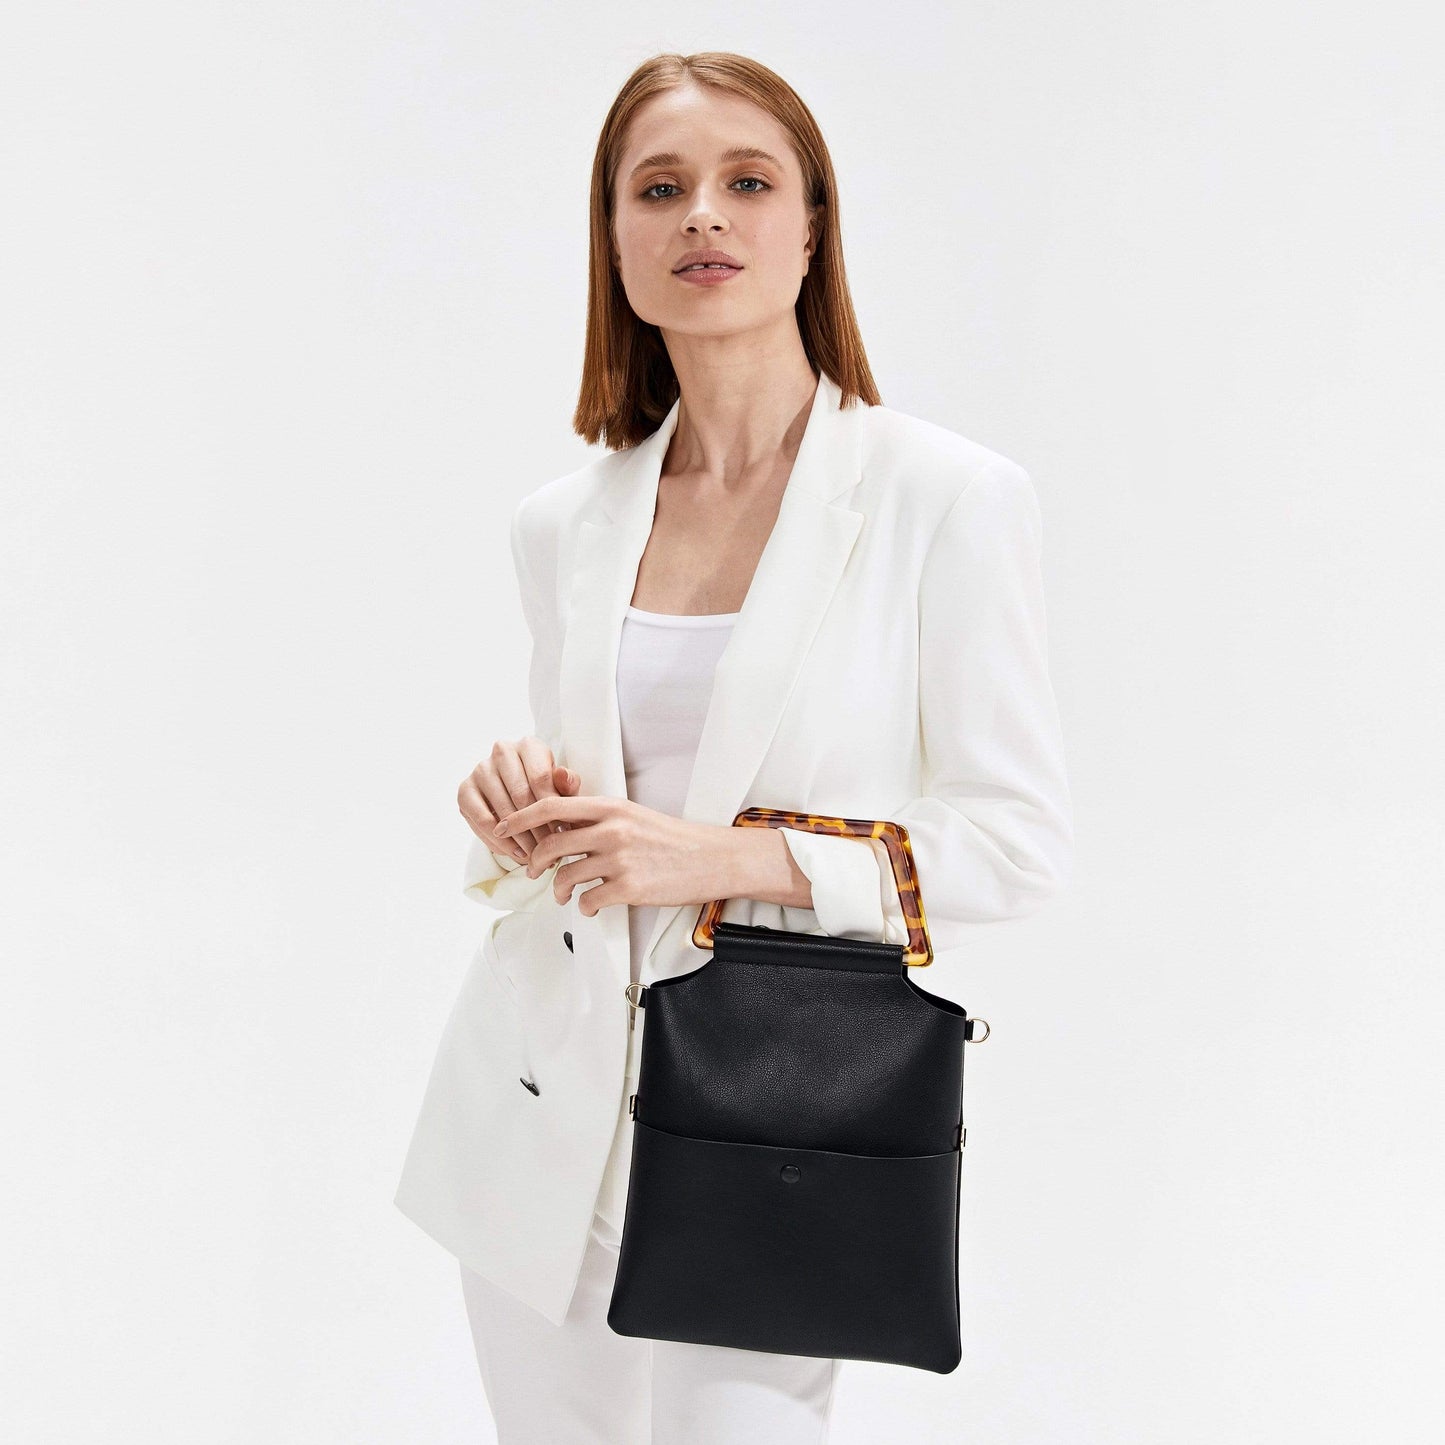 A woman in a white suite with a black handbag.